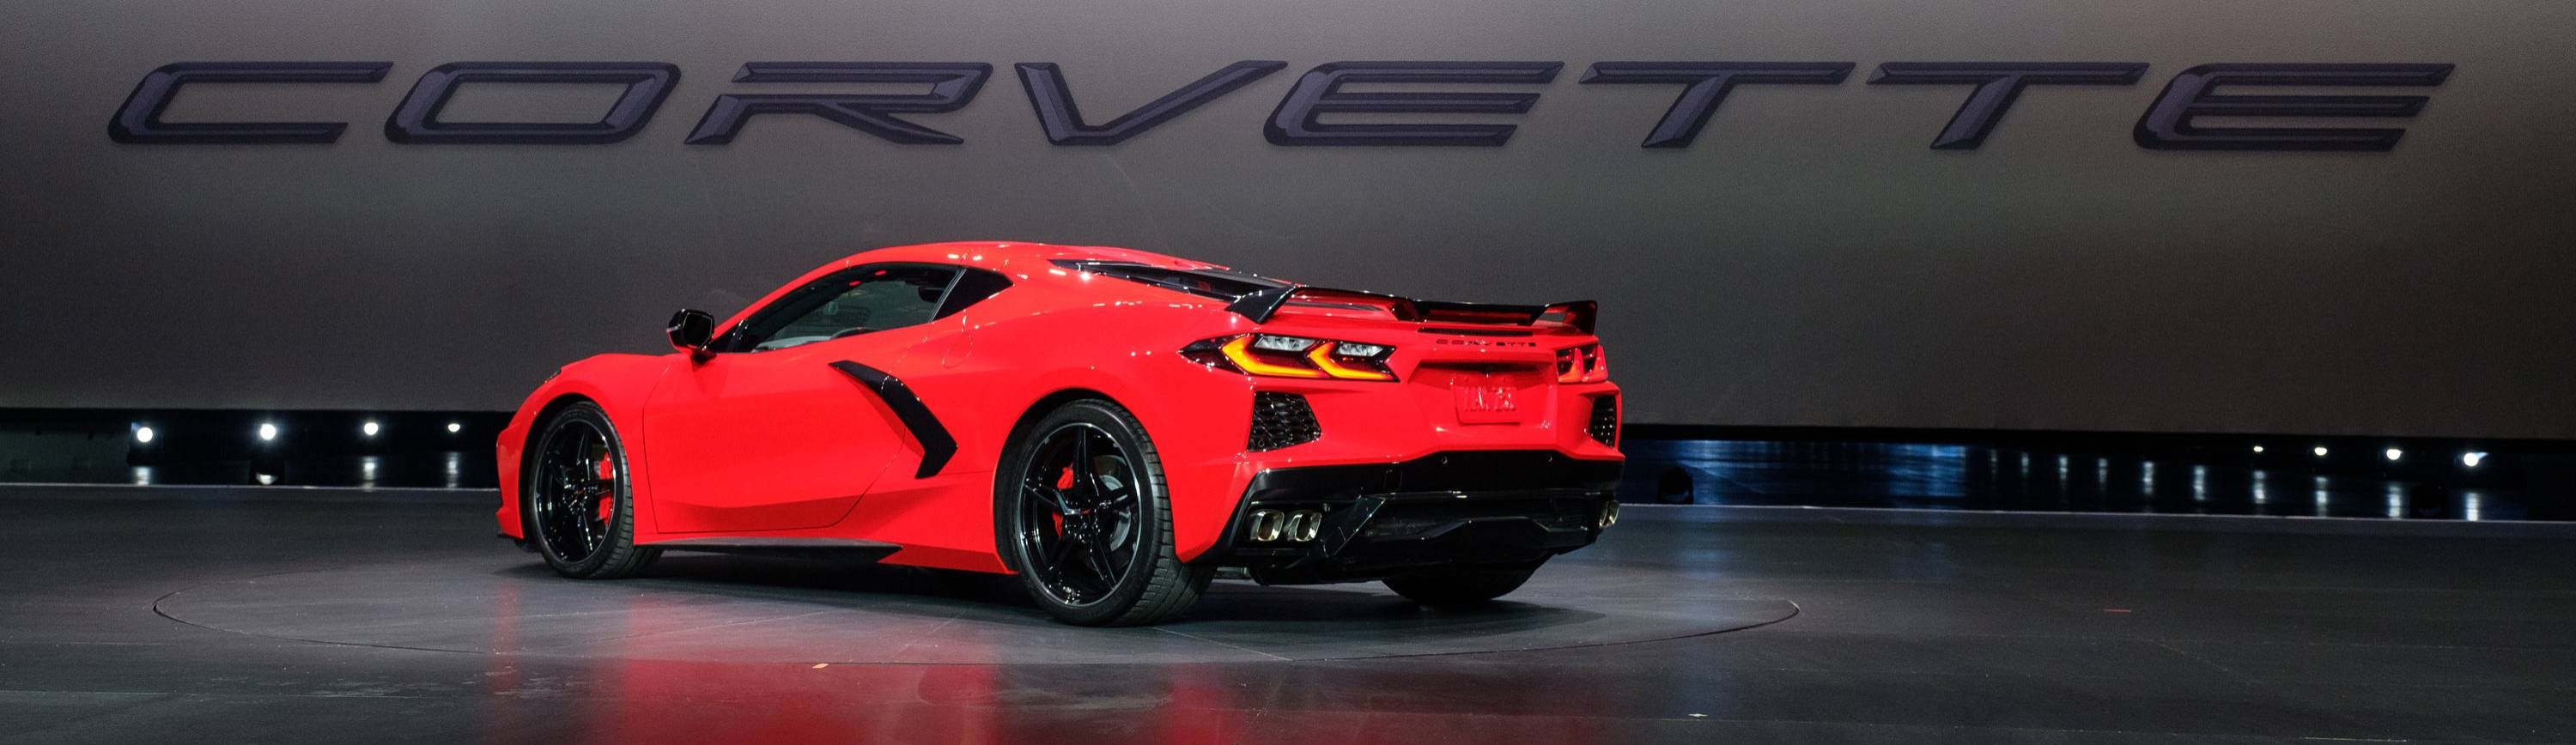 2020 Stingray Is The Fastest Most Powerful Entry Corvette